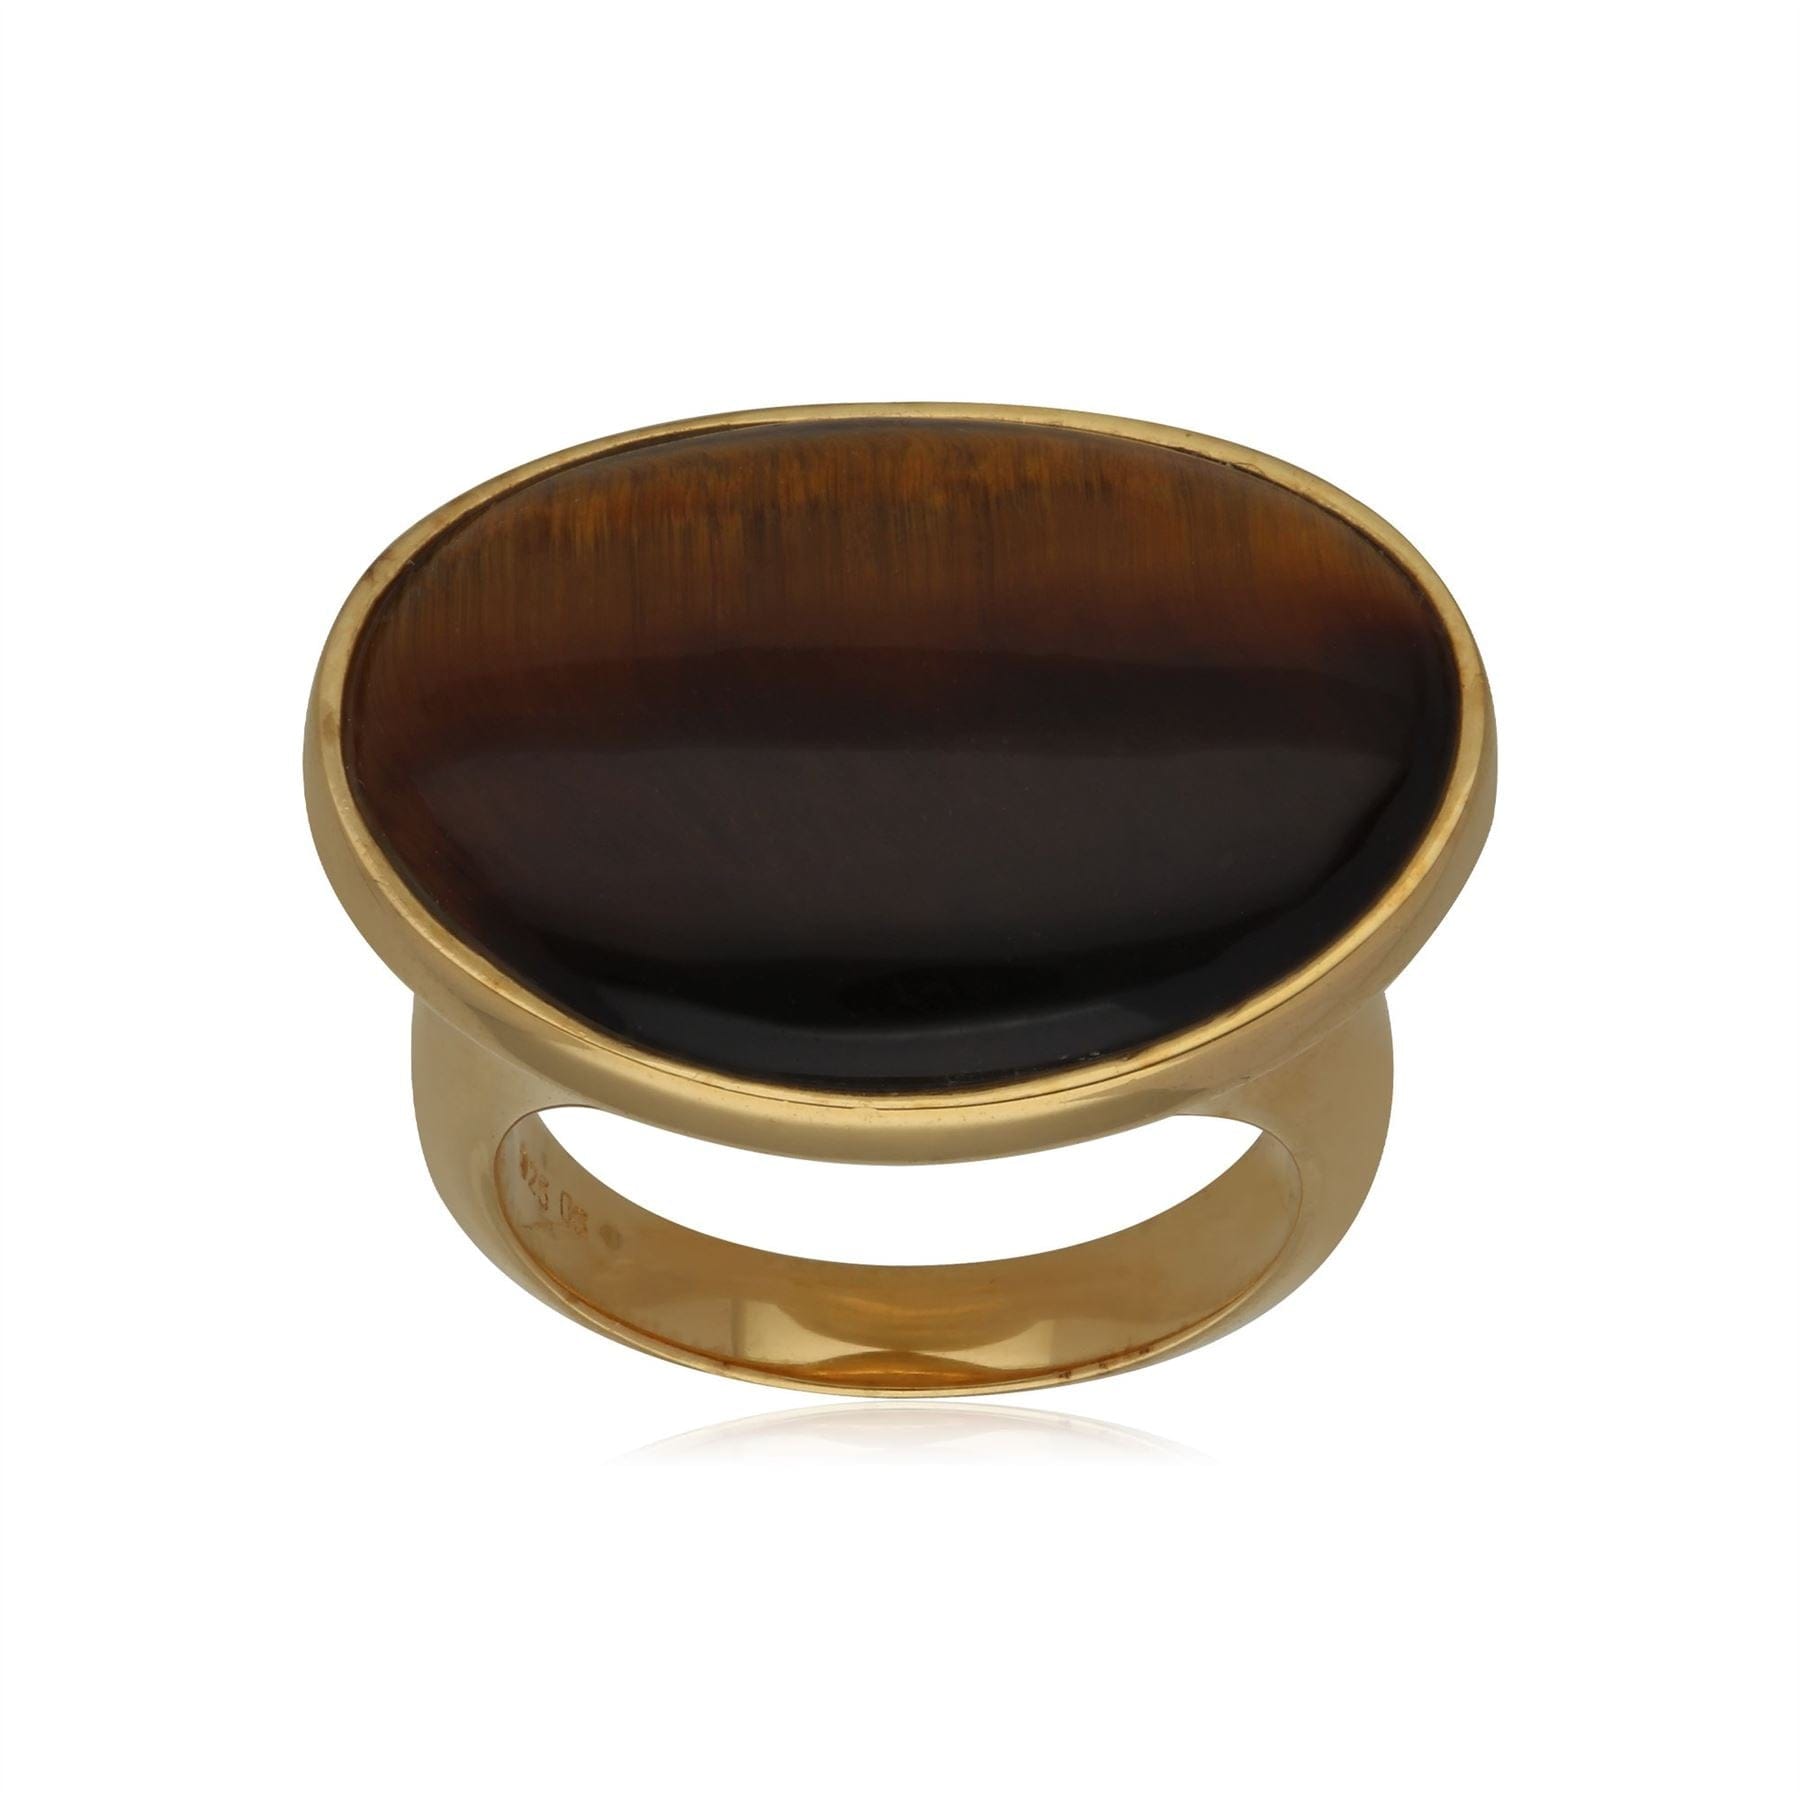 Kosmos Tiger's Eye Cocktail Ring in Gold Plated Sterling Silver - Gemondo